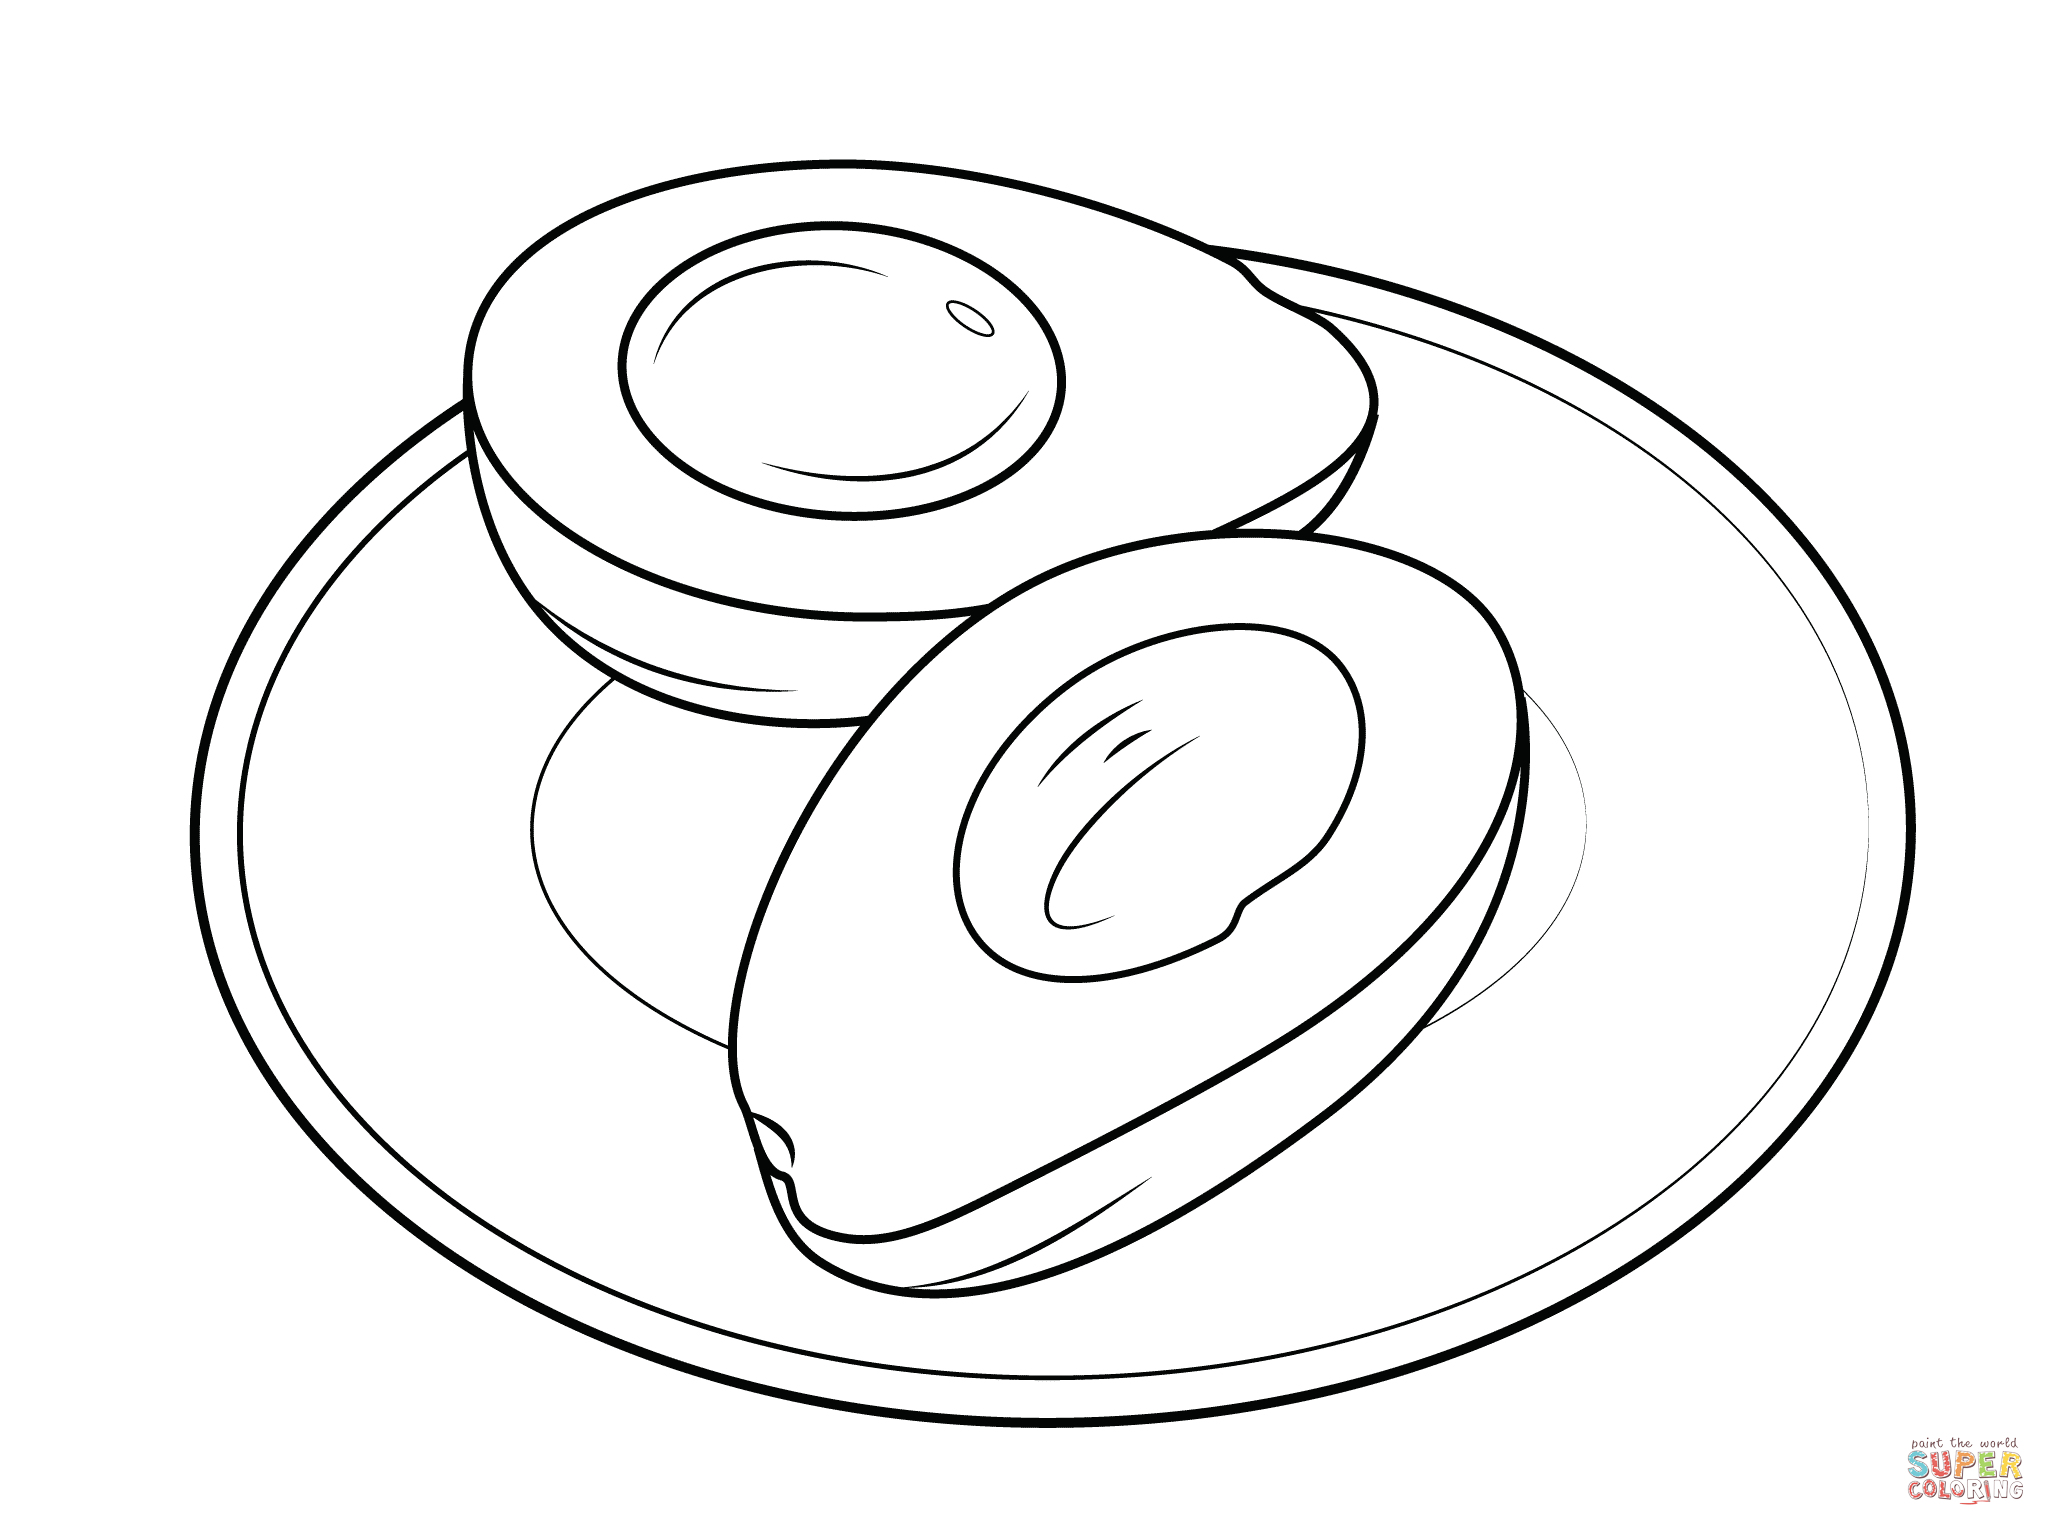 Avocado coloring pages | Free Coloring Pages